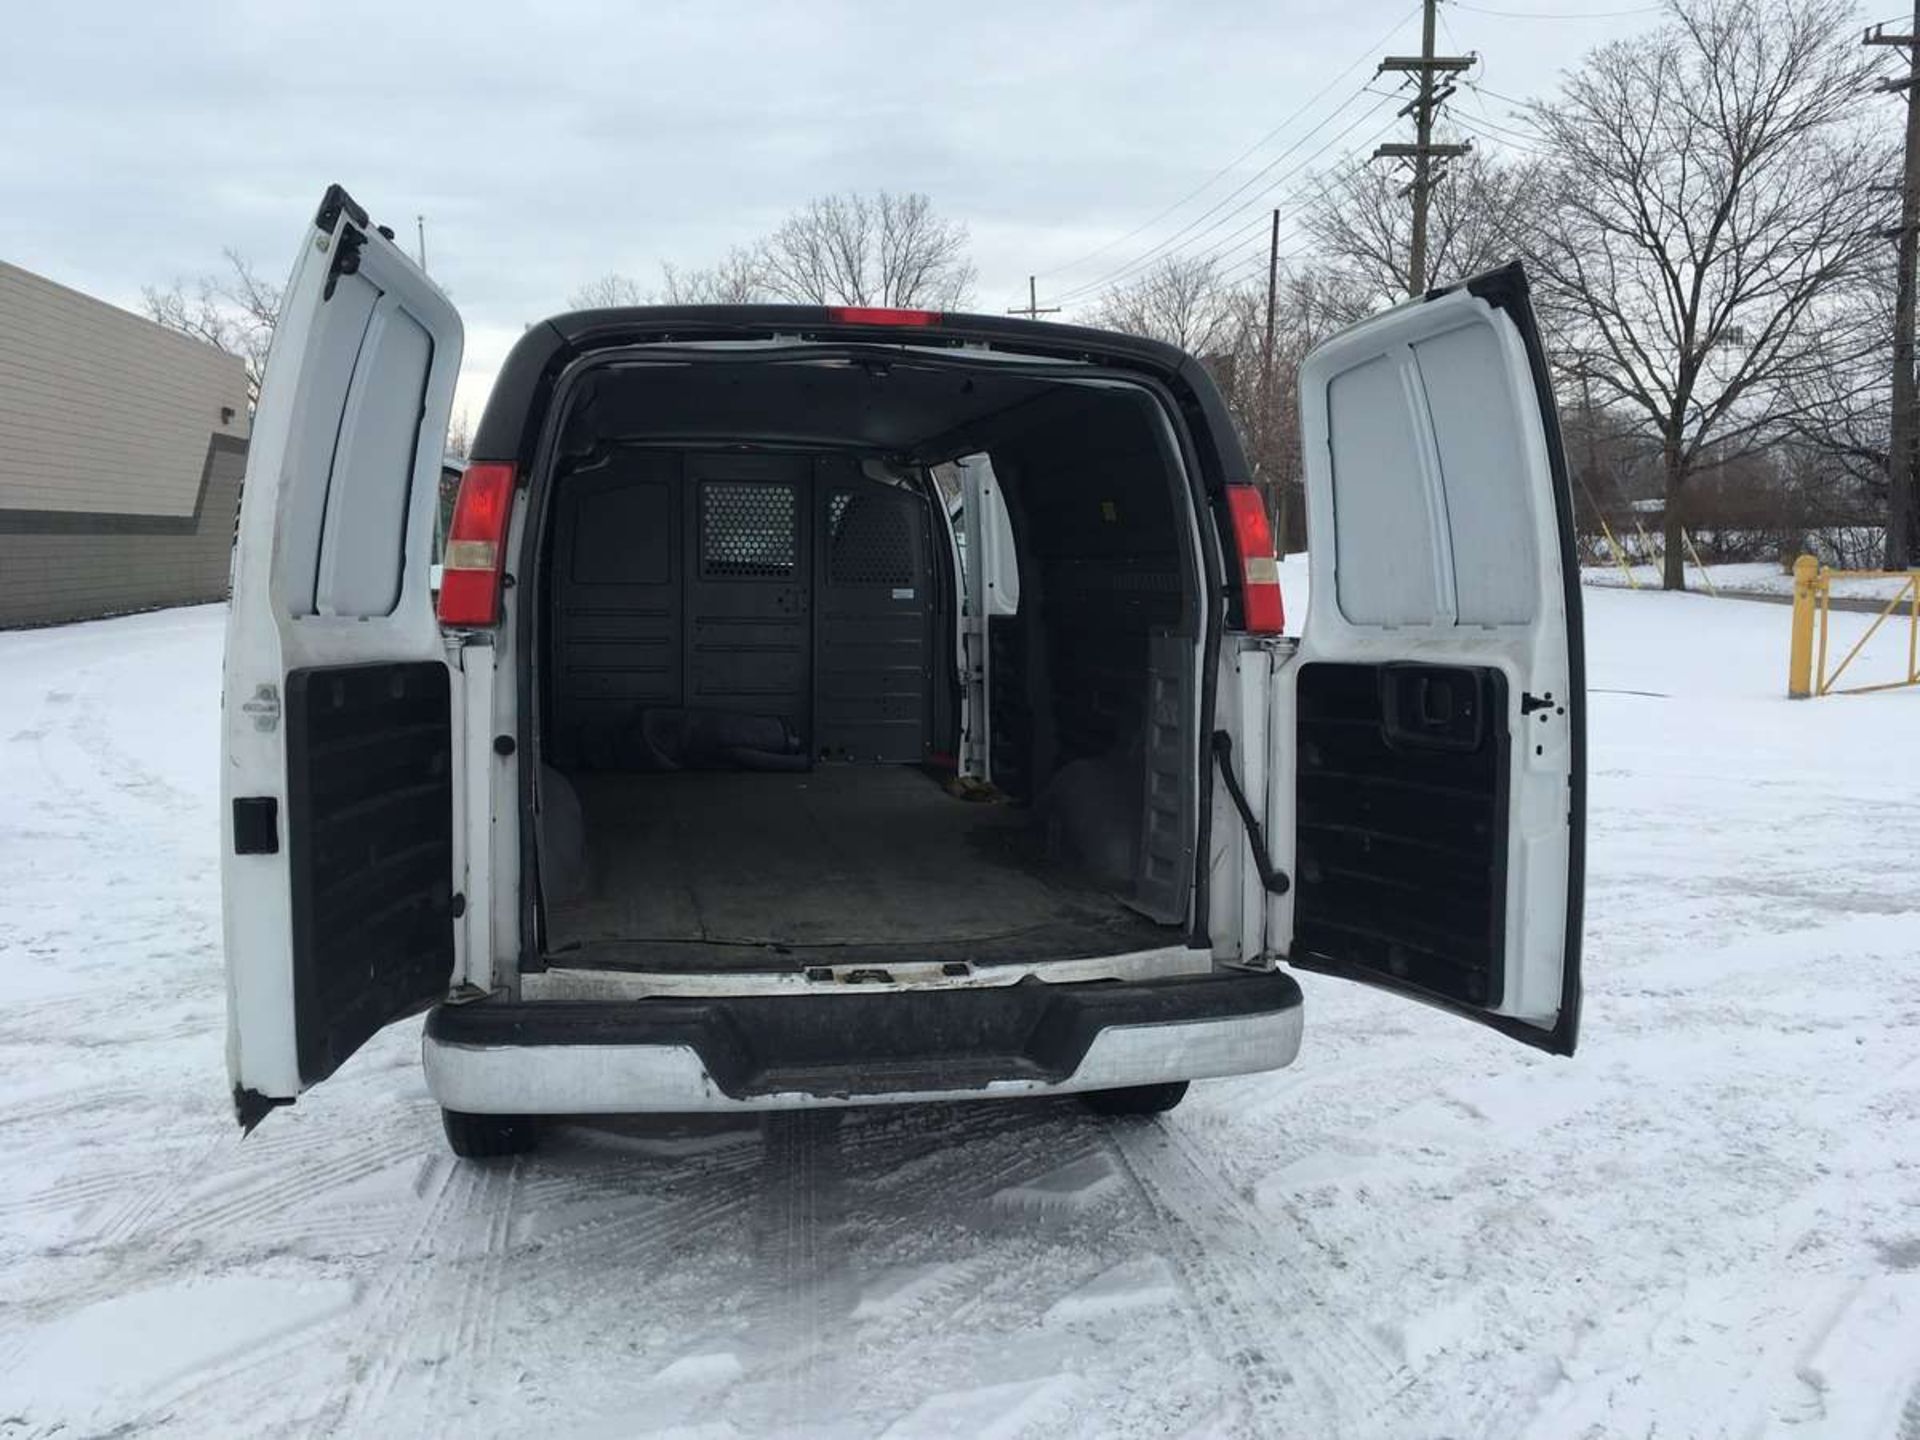 2013 Chevrolet Express 3500 EXT 1 Ton Capacity Extended Cargo Van - Image 11 of 14